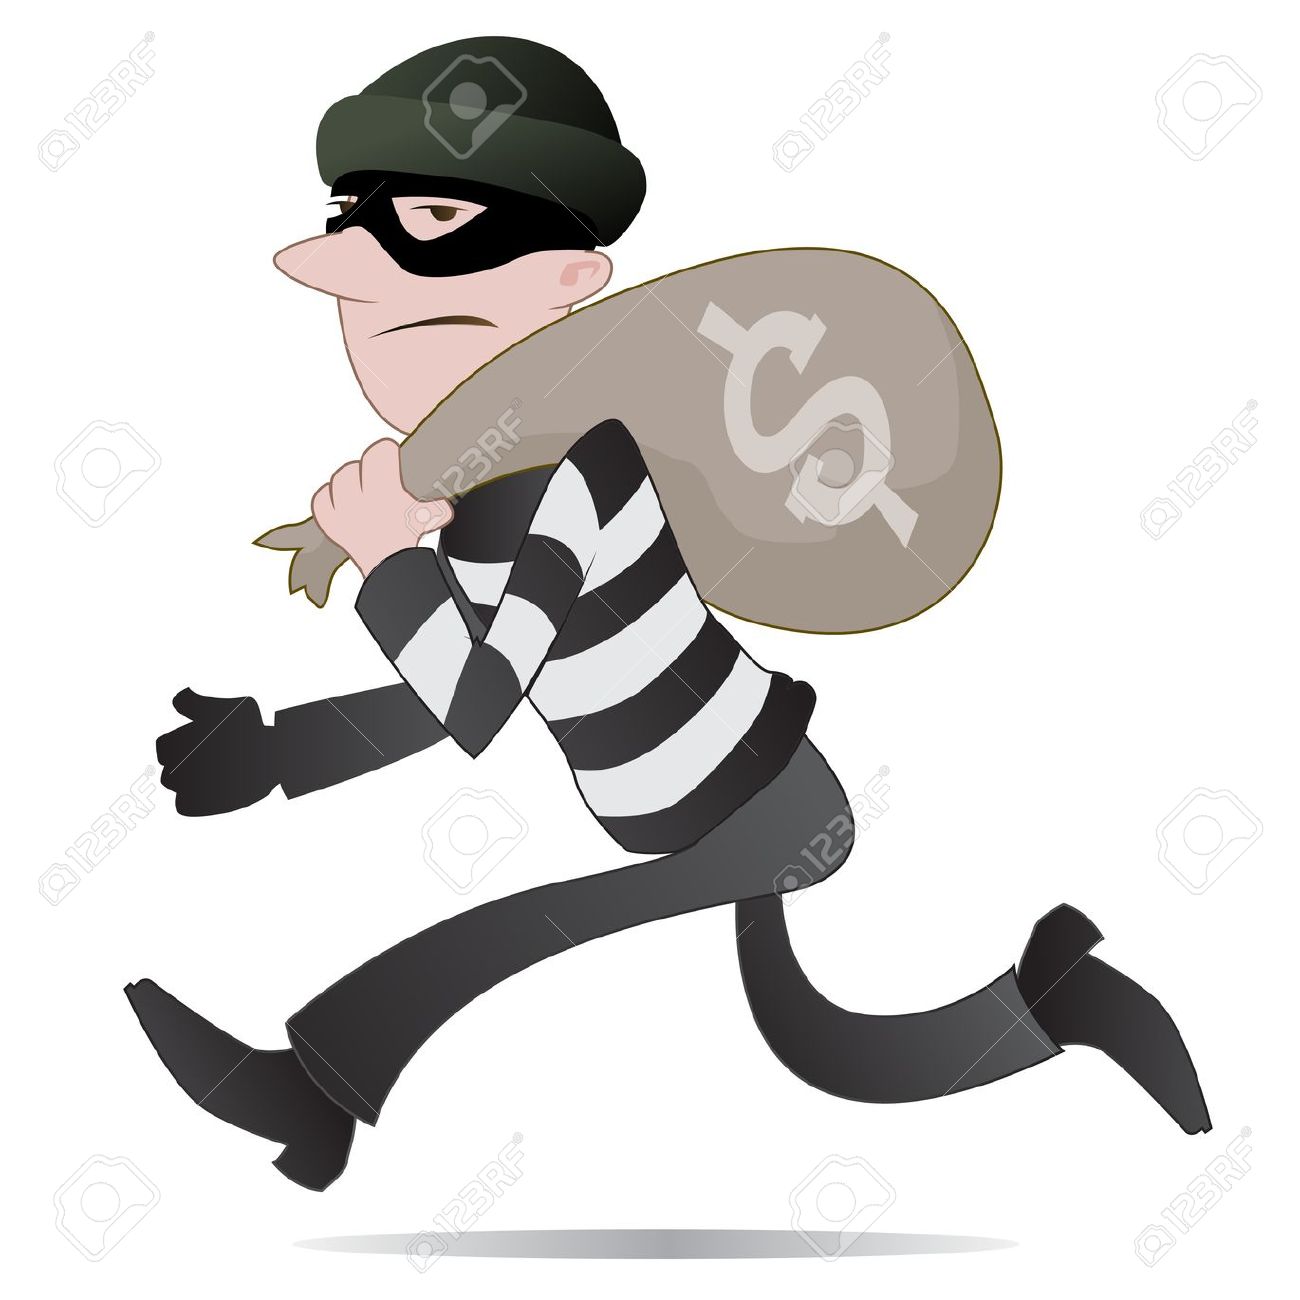 free clipart bank robber - photo #14